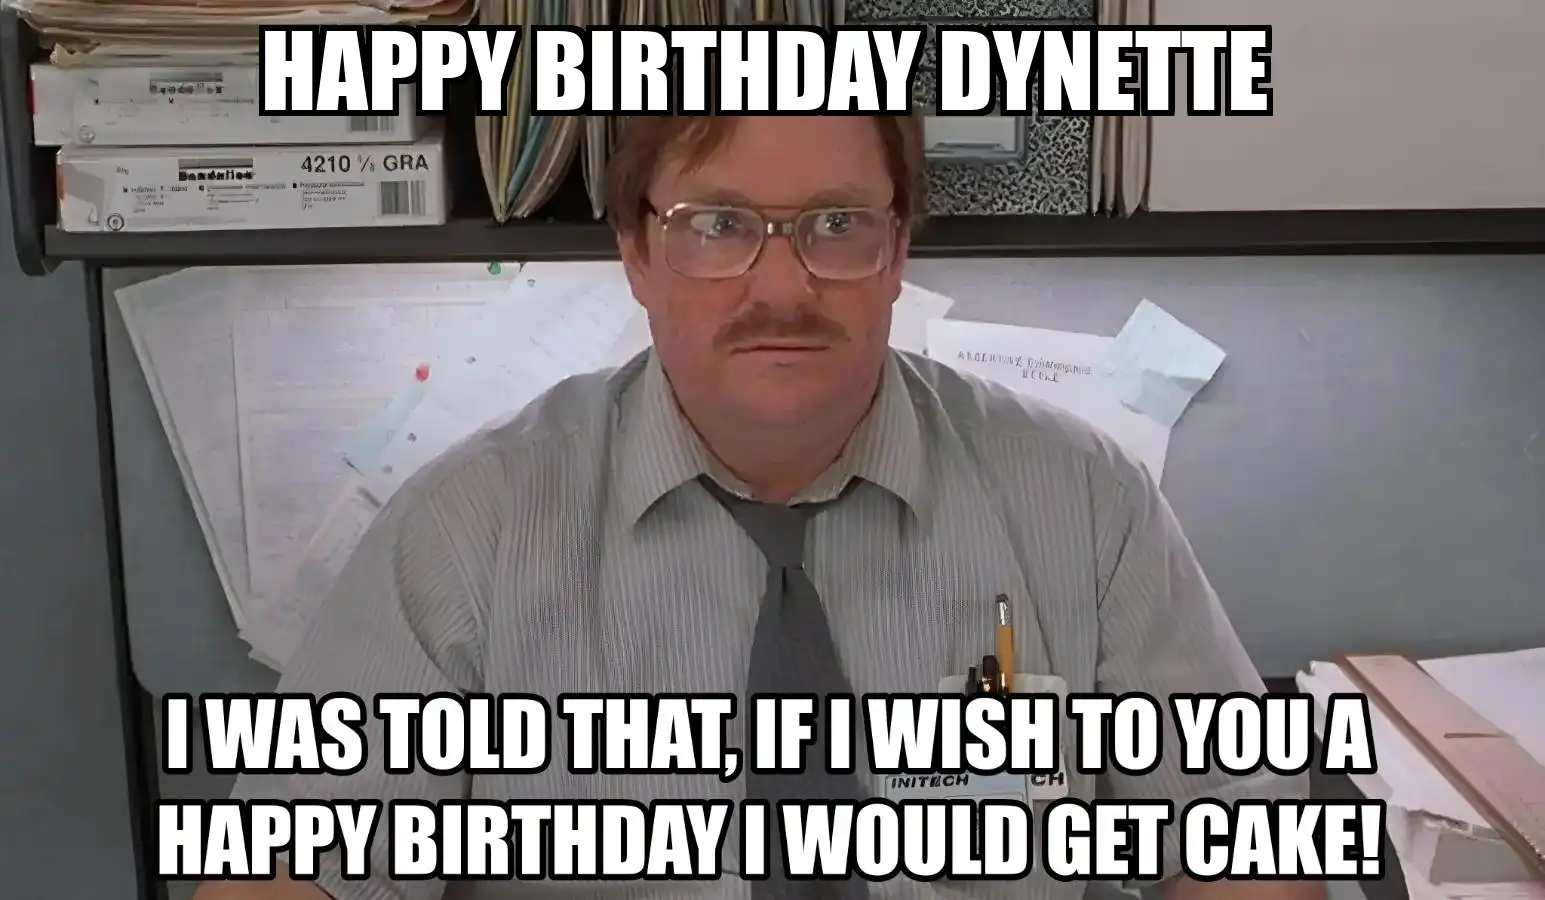 Happy Birthday Dynette I Would Get A Cake Meme